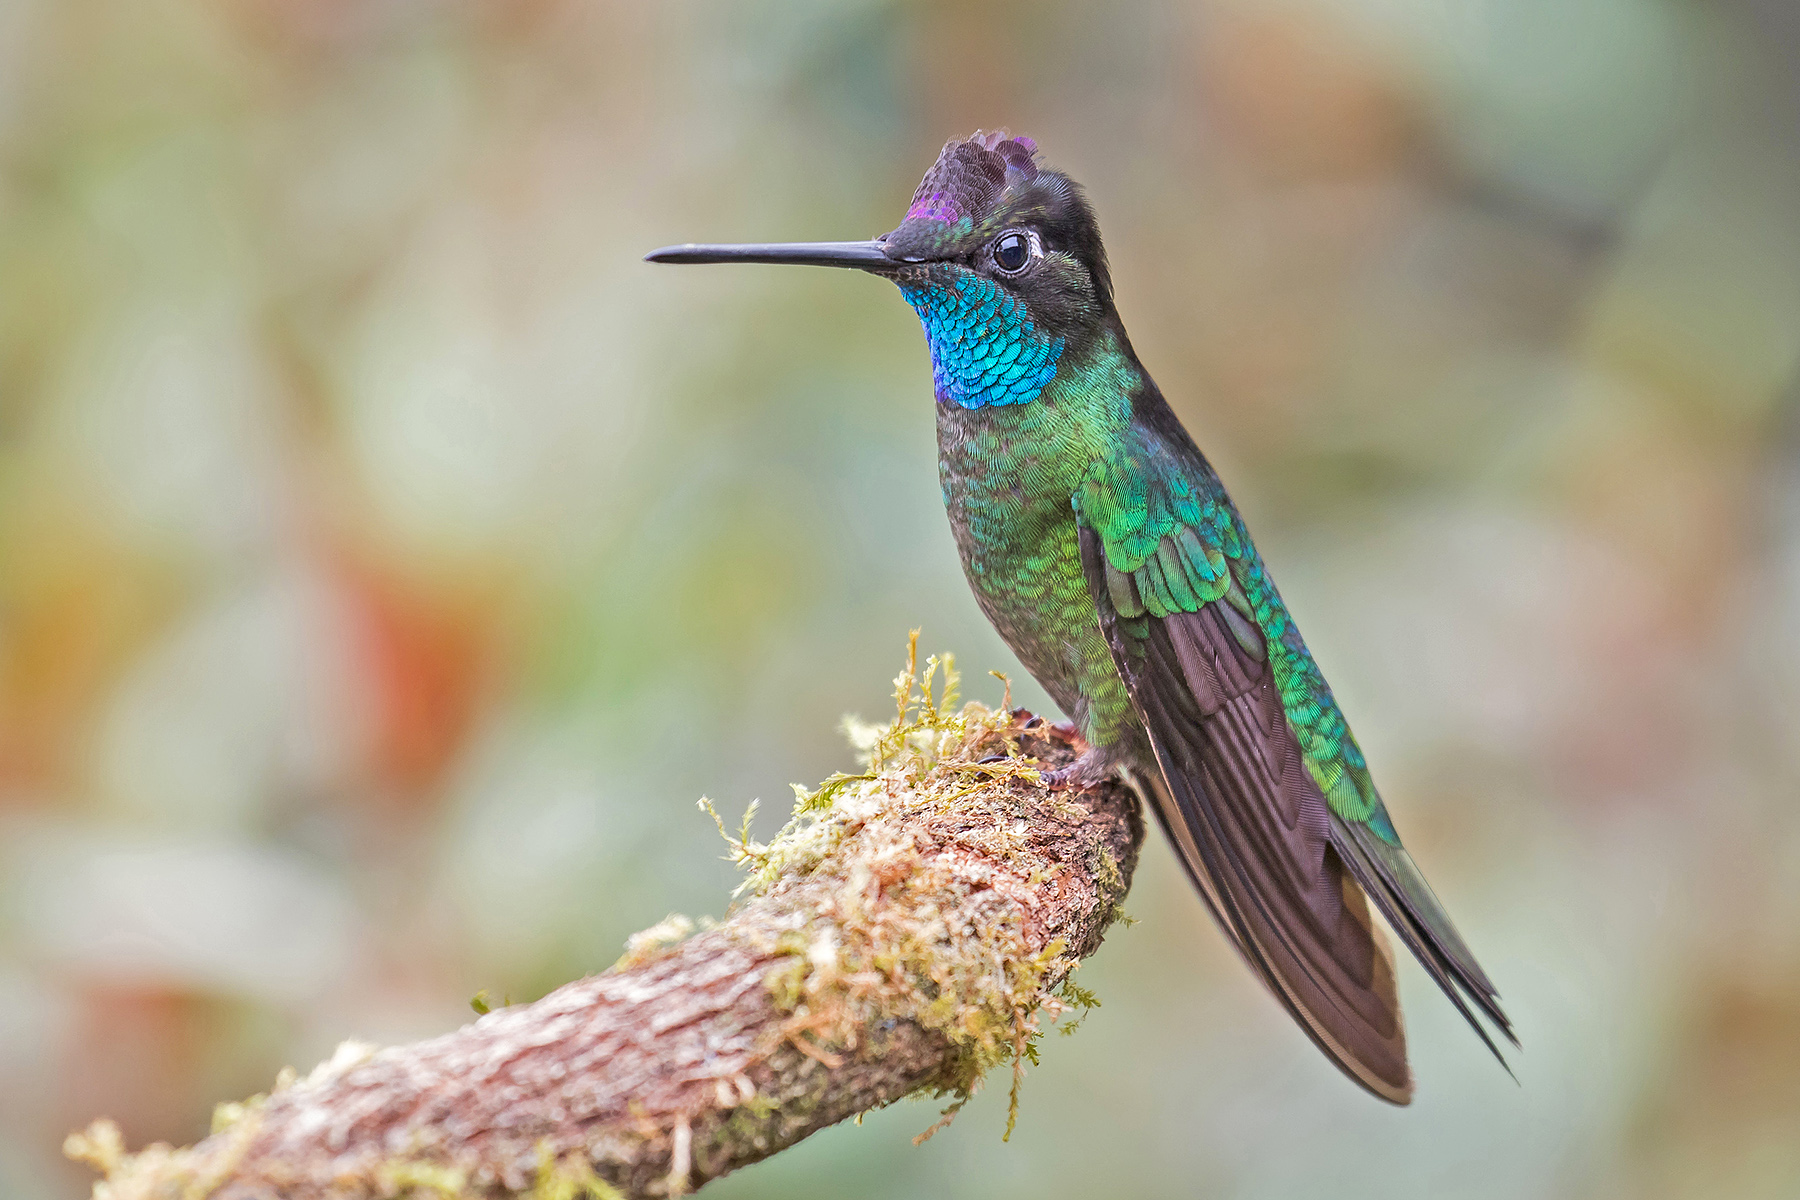 Admirable Hummingbird on our Costa Rica birding tour (image by Pete Morris)